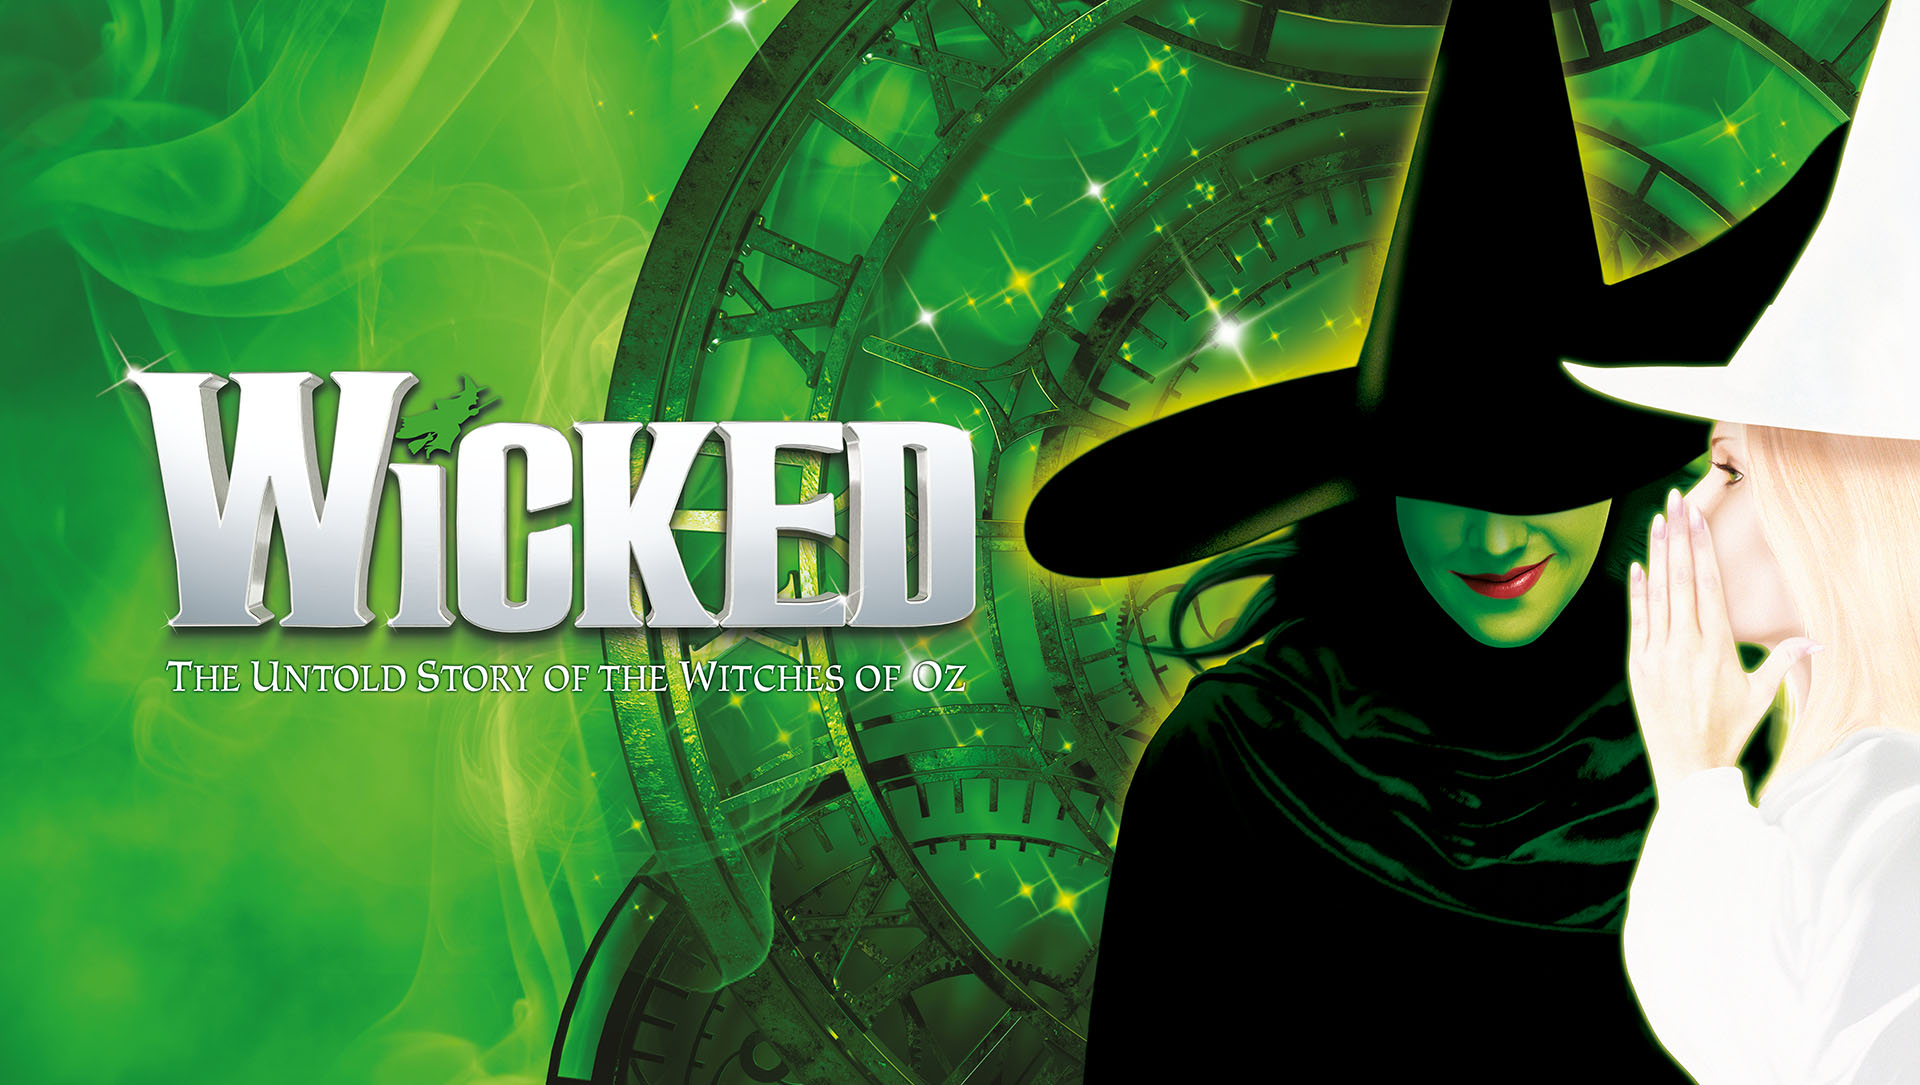 LX 3 Chargehand – Wicked The Musical (West End)